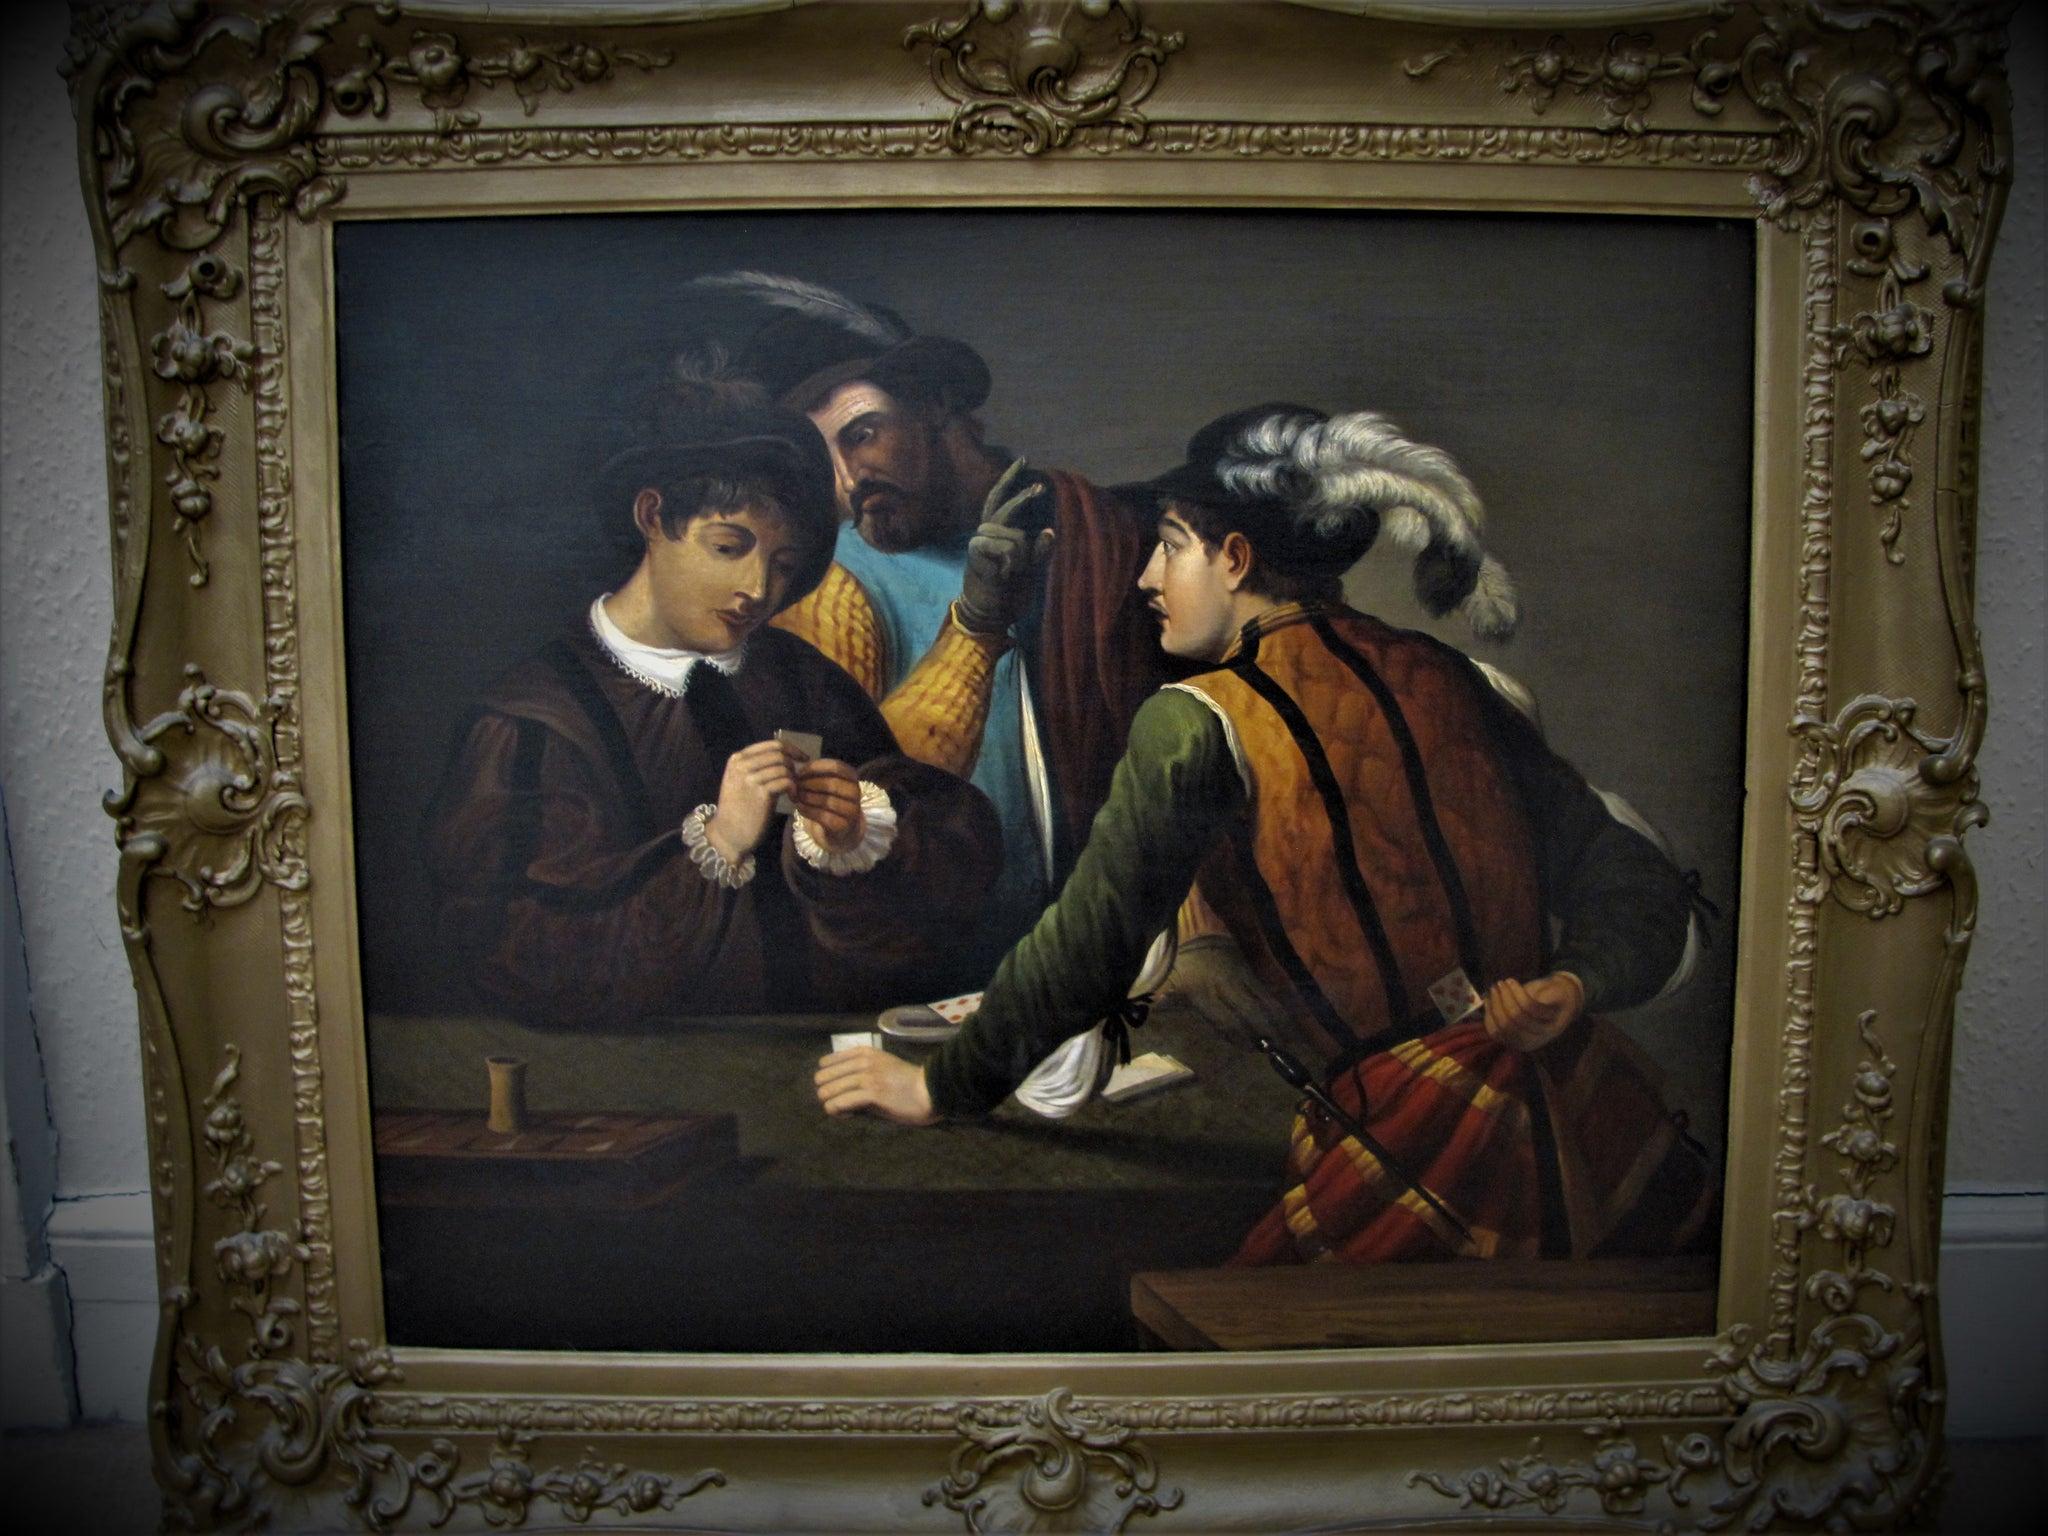 (After) Caravaggio Interior Painting - 19th Century portrait after caravaggio "The Card Sharps"